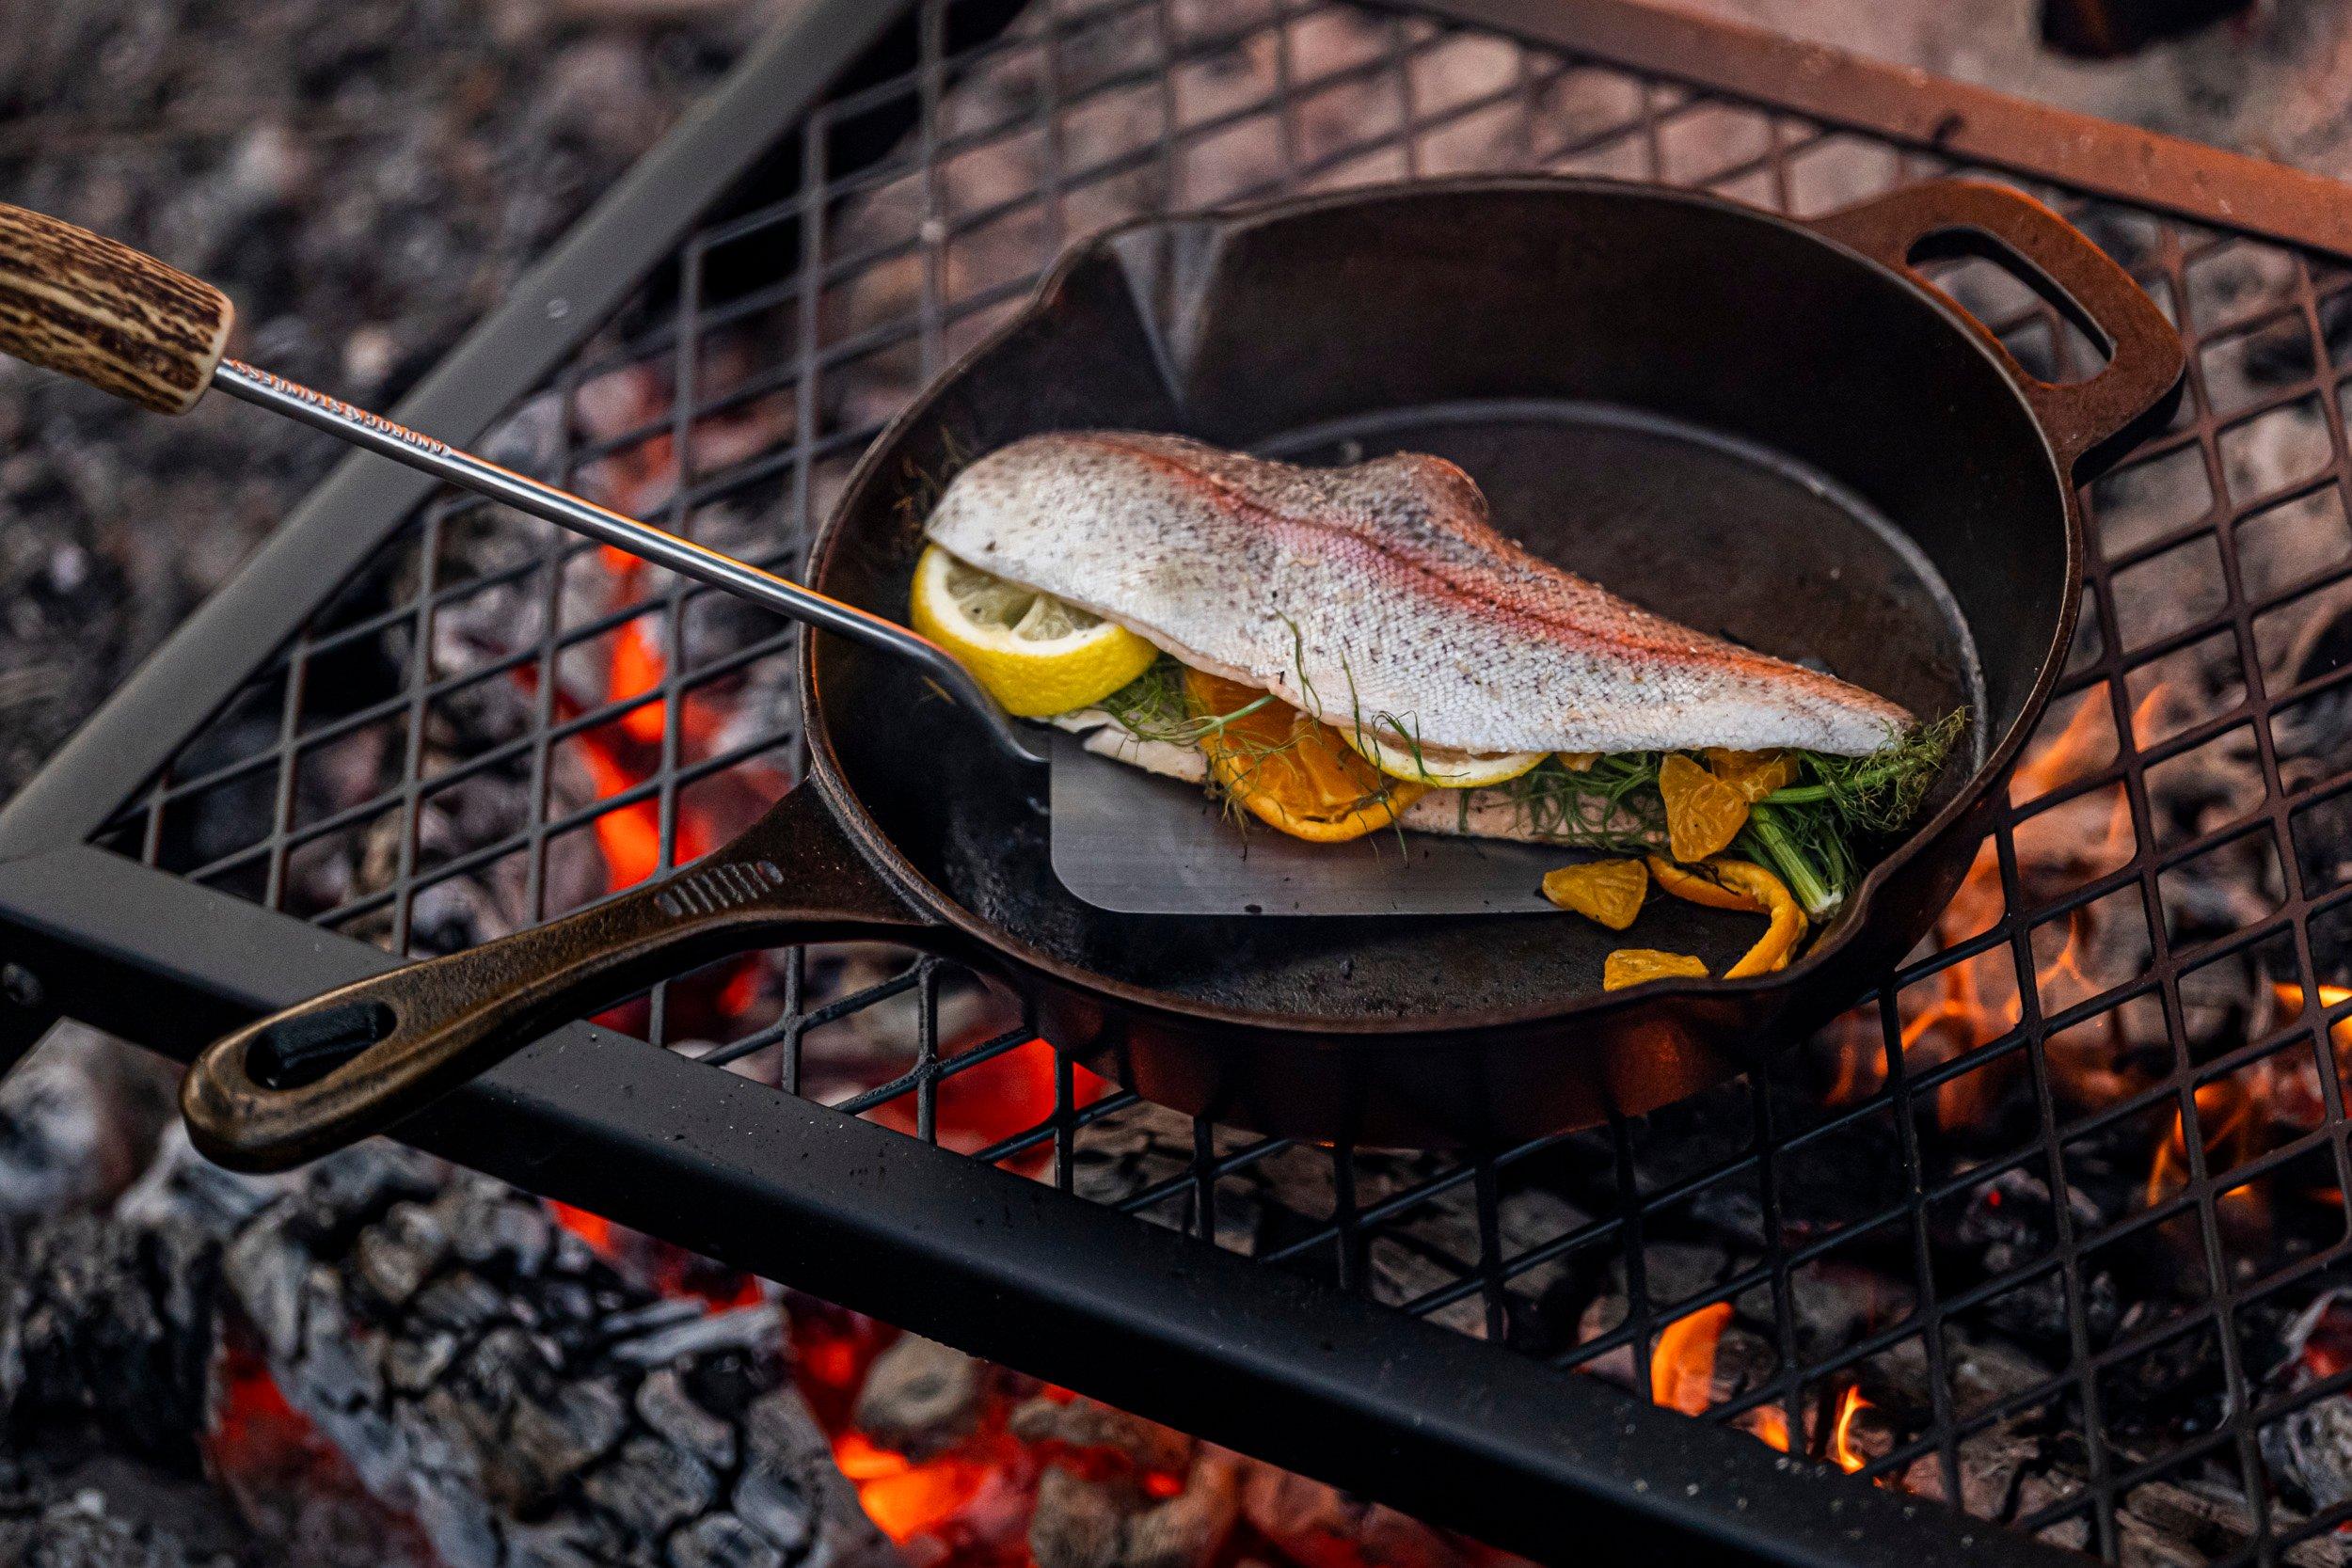 Cook the fish for a few minutes per side until meat is cooked through and flakes easily with a fork. Image by GritMedia